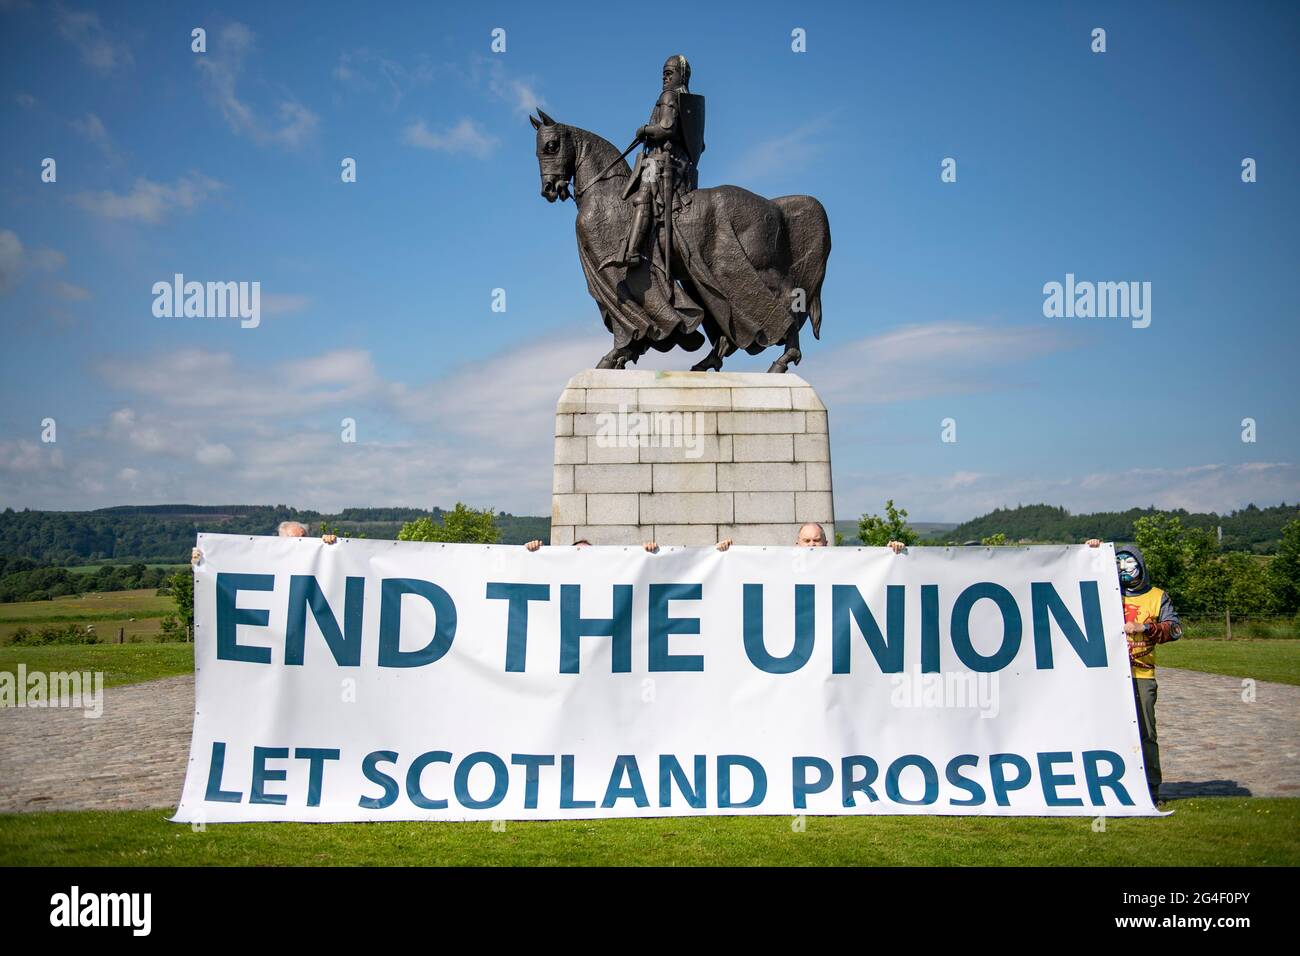 Battle of Bannockburn site, Stirling, Scotland, UK. 21st June, 2021. PICTURED: Sean Clerkin of Action for Scotland, (seen wearing black T-shirt) seen with fellow protestors at the site of the Battle of Bannockburn in front of the Robert the Bruce statue with a large protest banner which reads, ‘END THE UNION LET SCOTLAND PROSPER' in large capital letters. Pic Credit: Colin Fisher/Alamy Live News Stock Photo